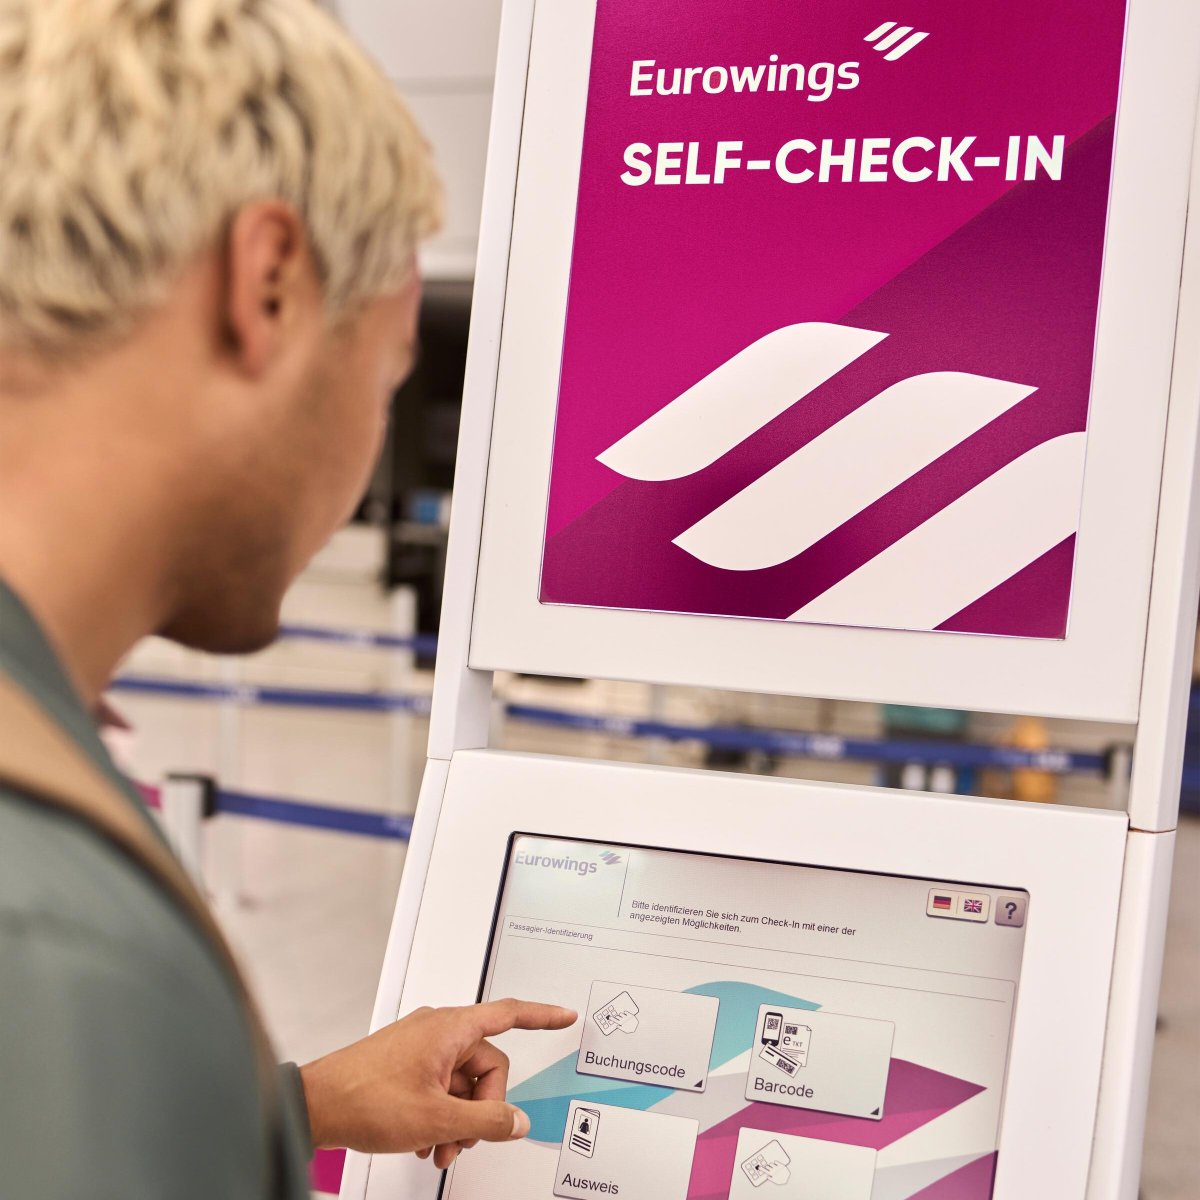 Travel hack for your Easter getaway from @dusairport: Beat the holiday rush with our self-service options! Check in your baggage quickly at our new self-bag drop and baggage tag machines. More time to relax, less time in lines! ✈️🐣